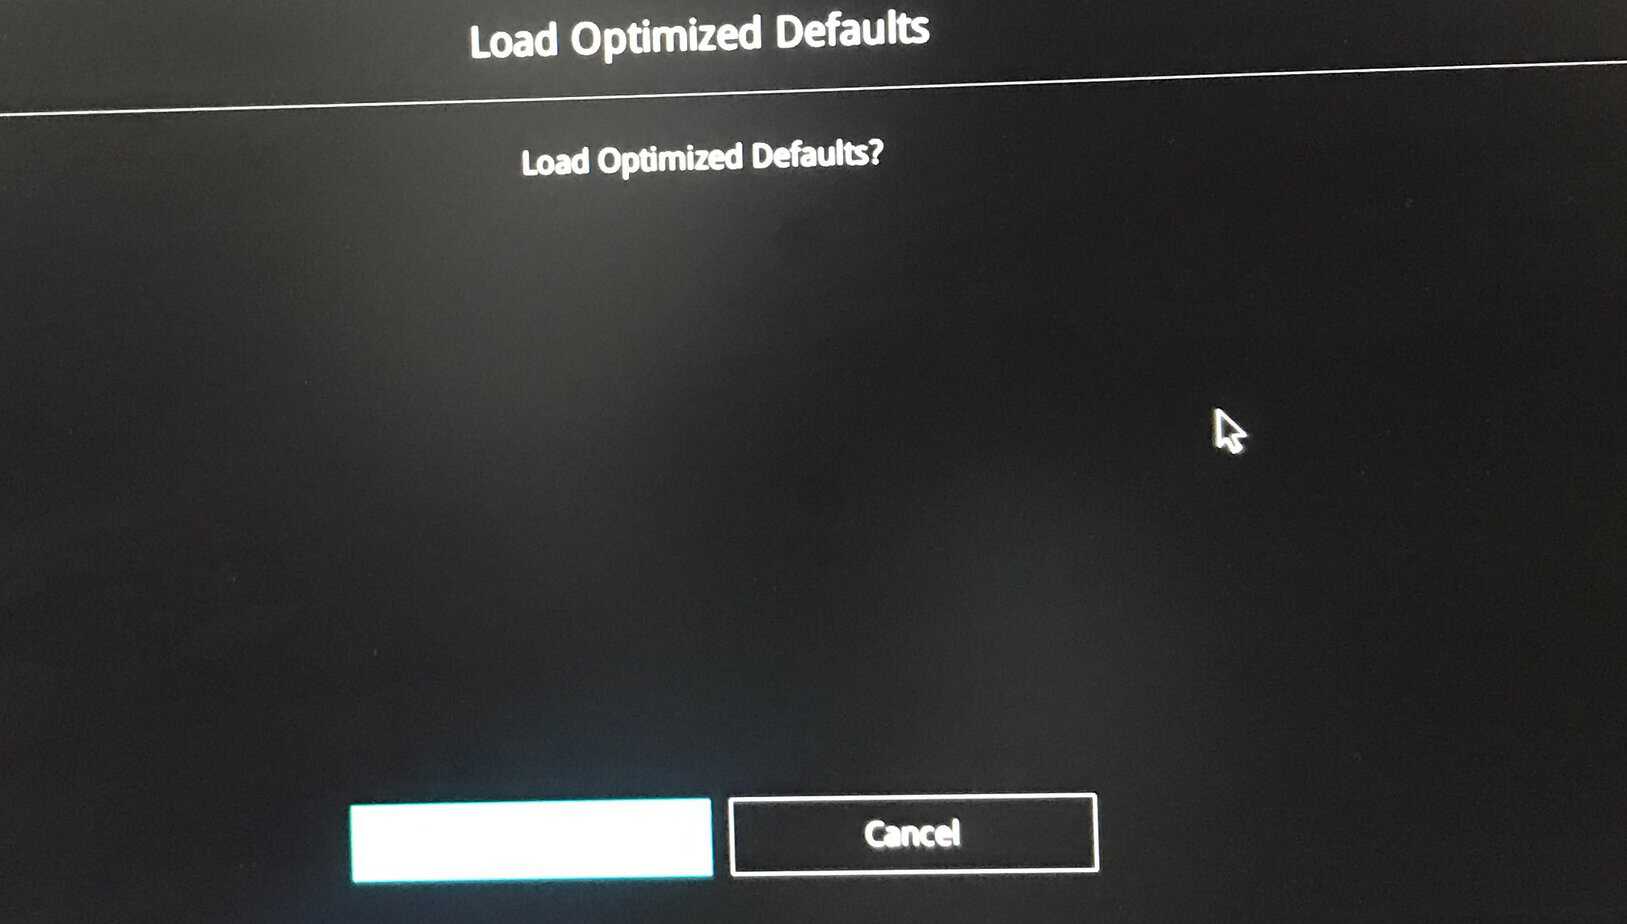 ok to load optimized defaults